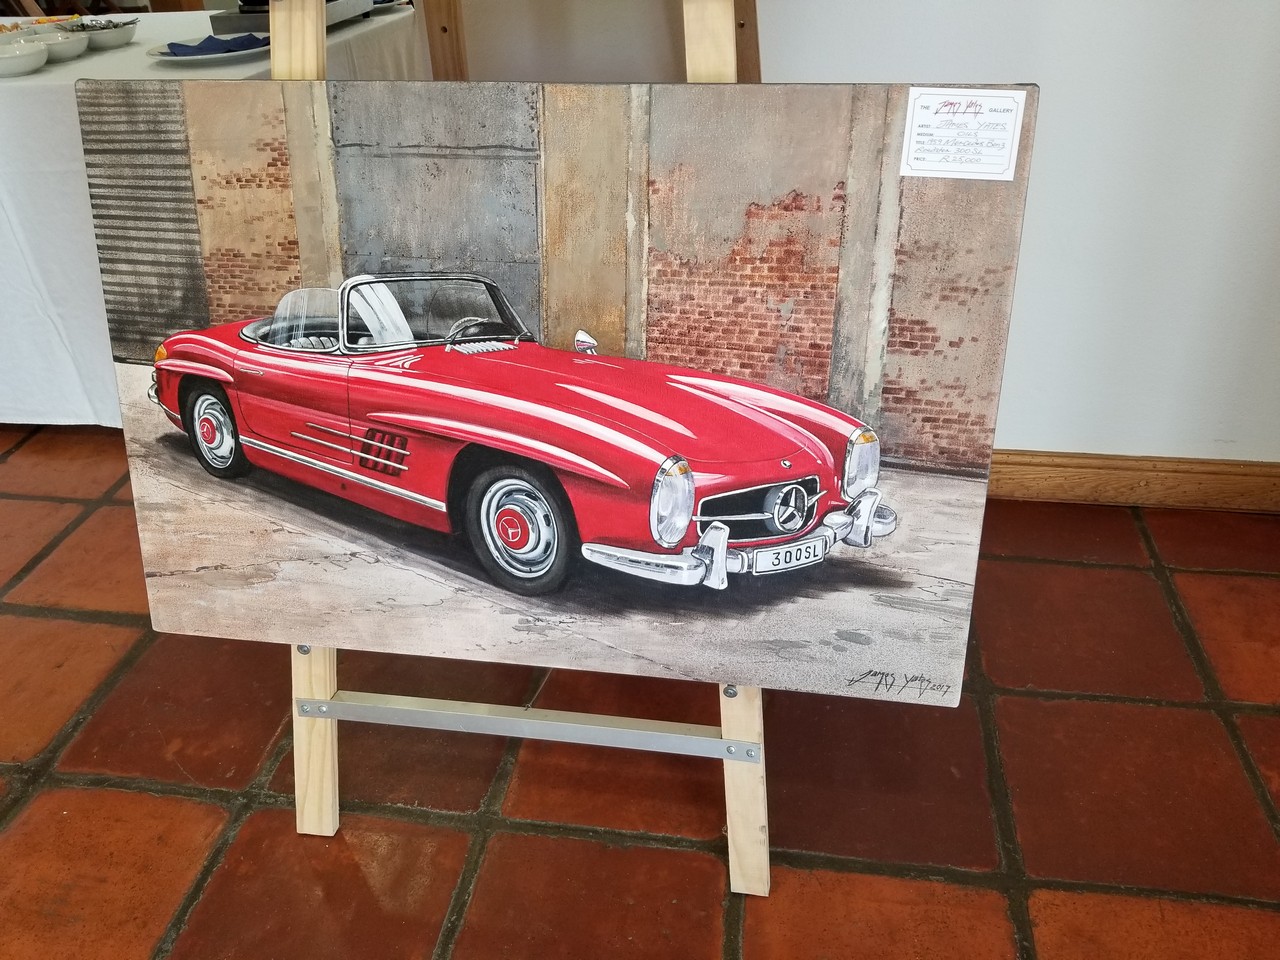 a painting of a red car on a stand